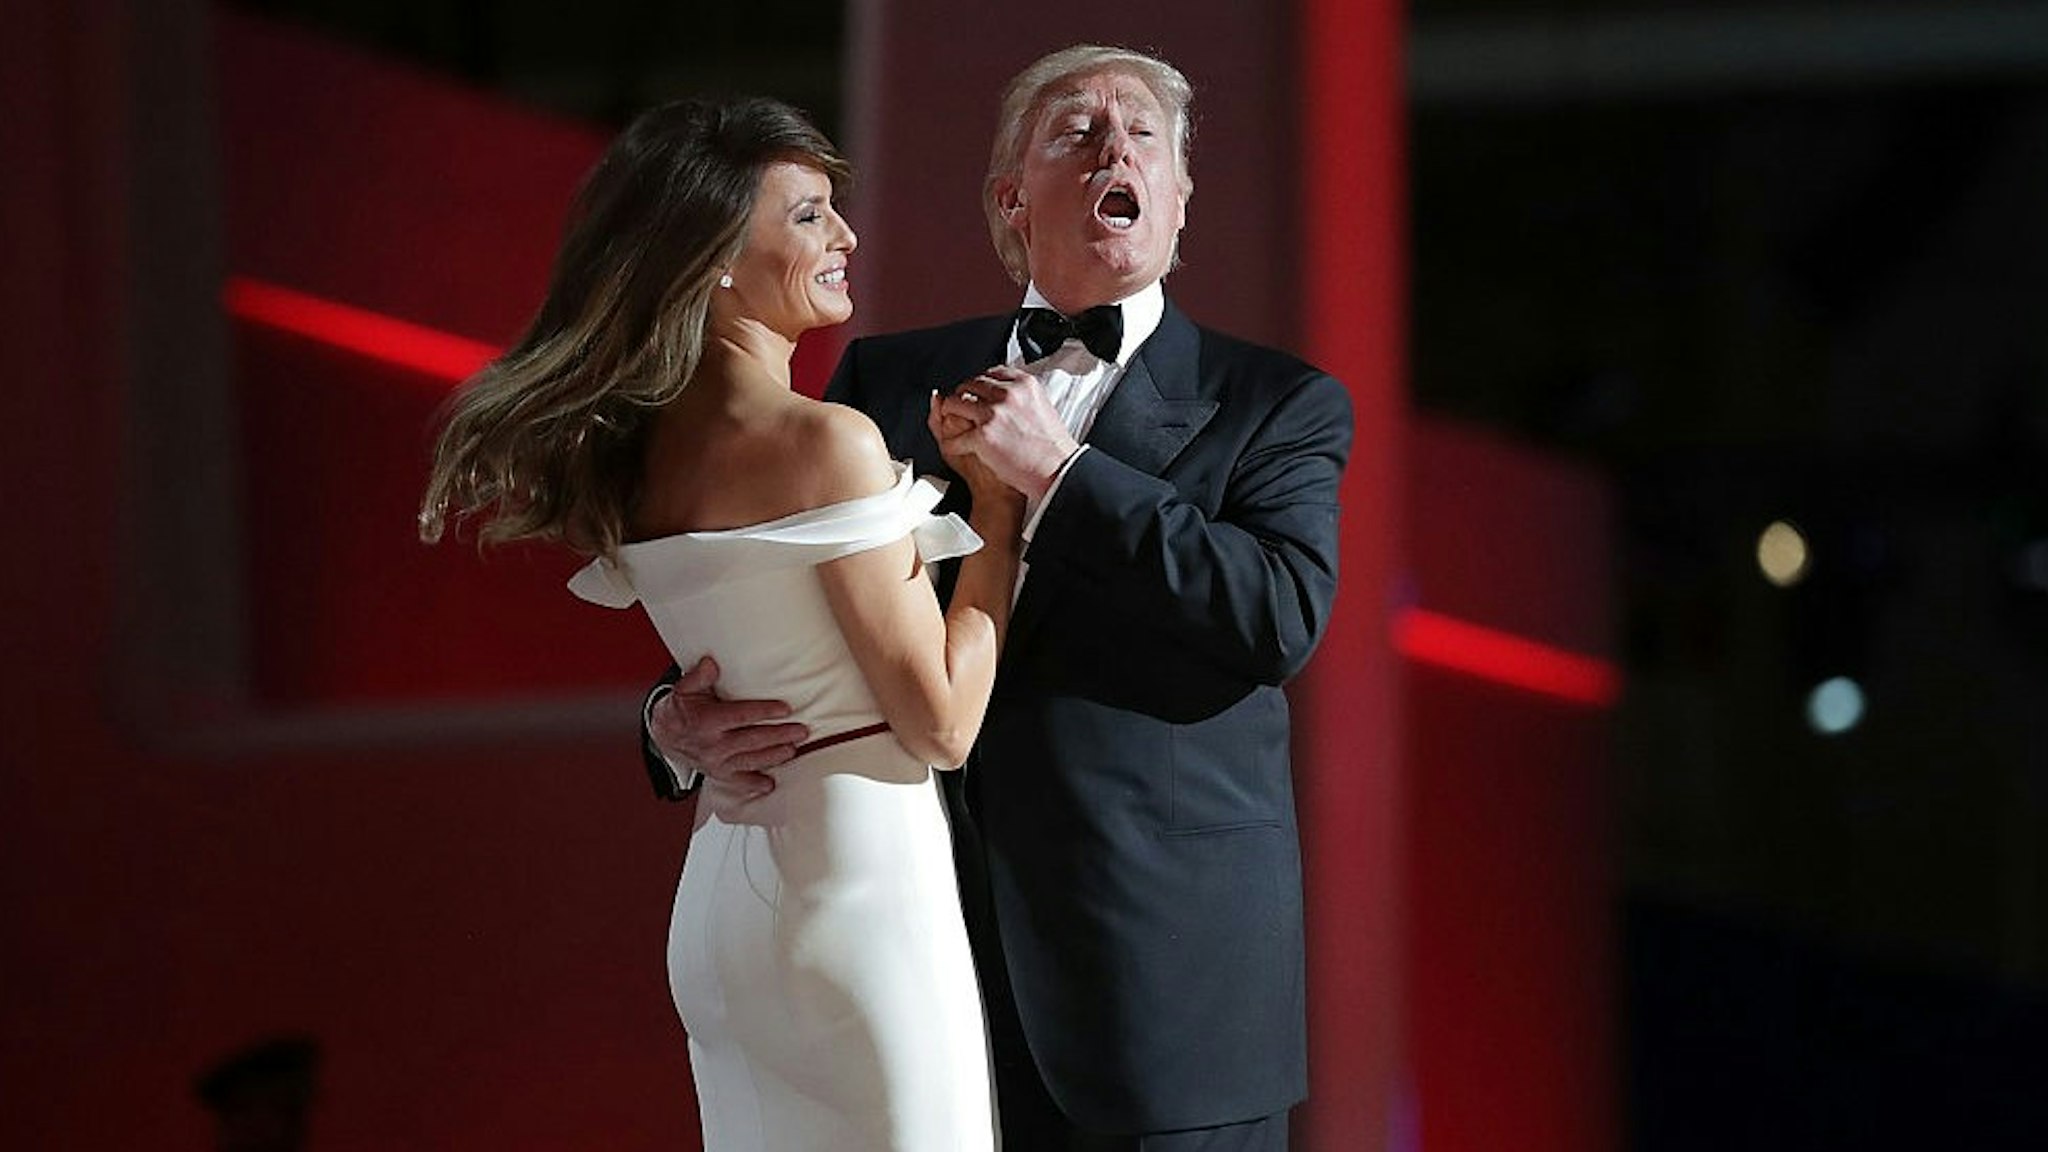 WASHINGTON, DC - JANUARY 20: U.S. President Donald Trump sings to the song "My Way" while dancing with first lady Melania Trump during the inaugural Liberty Ball at the Washington Convention Center January 20, 2017 in Washington, DC. The ball is part of the celebrations following the inauguration Trump. (Photo by